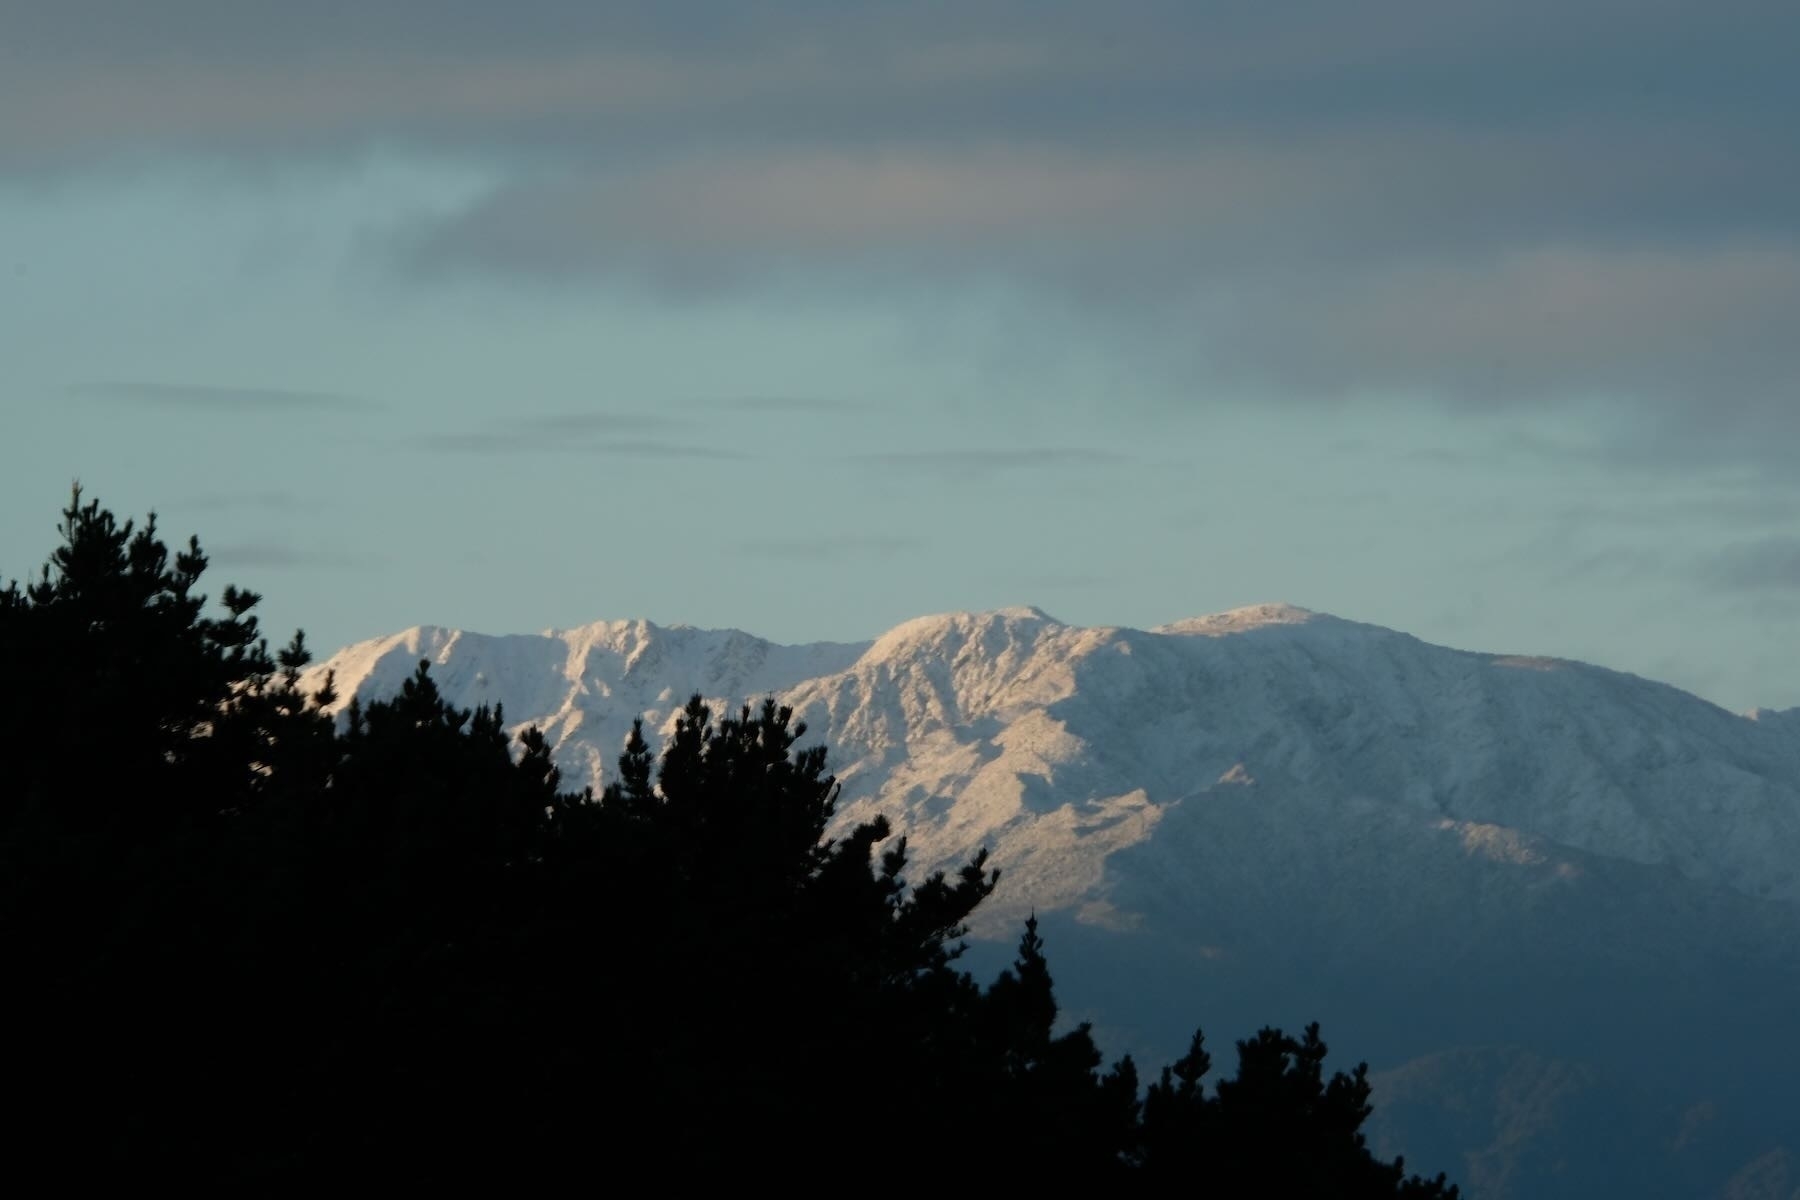 Snow capped mountains, with trees in foreground. 